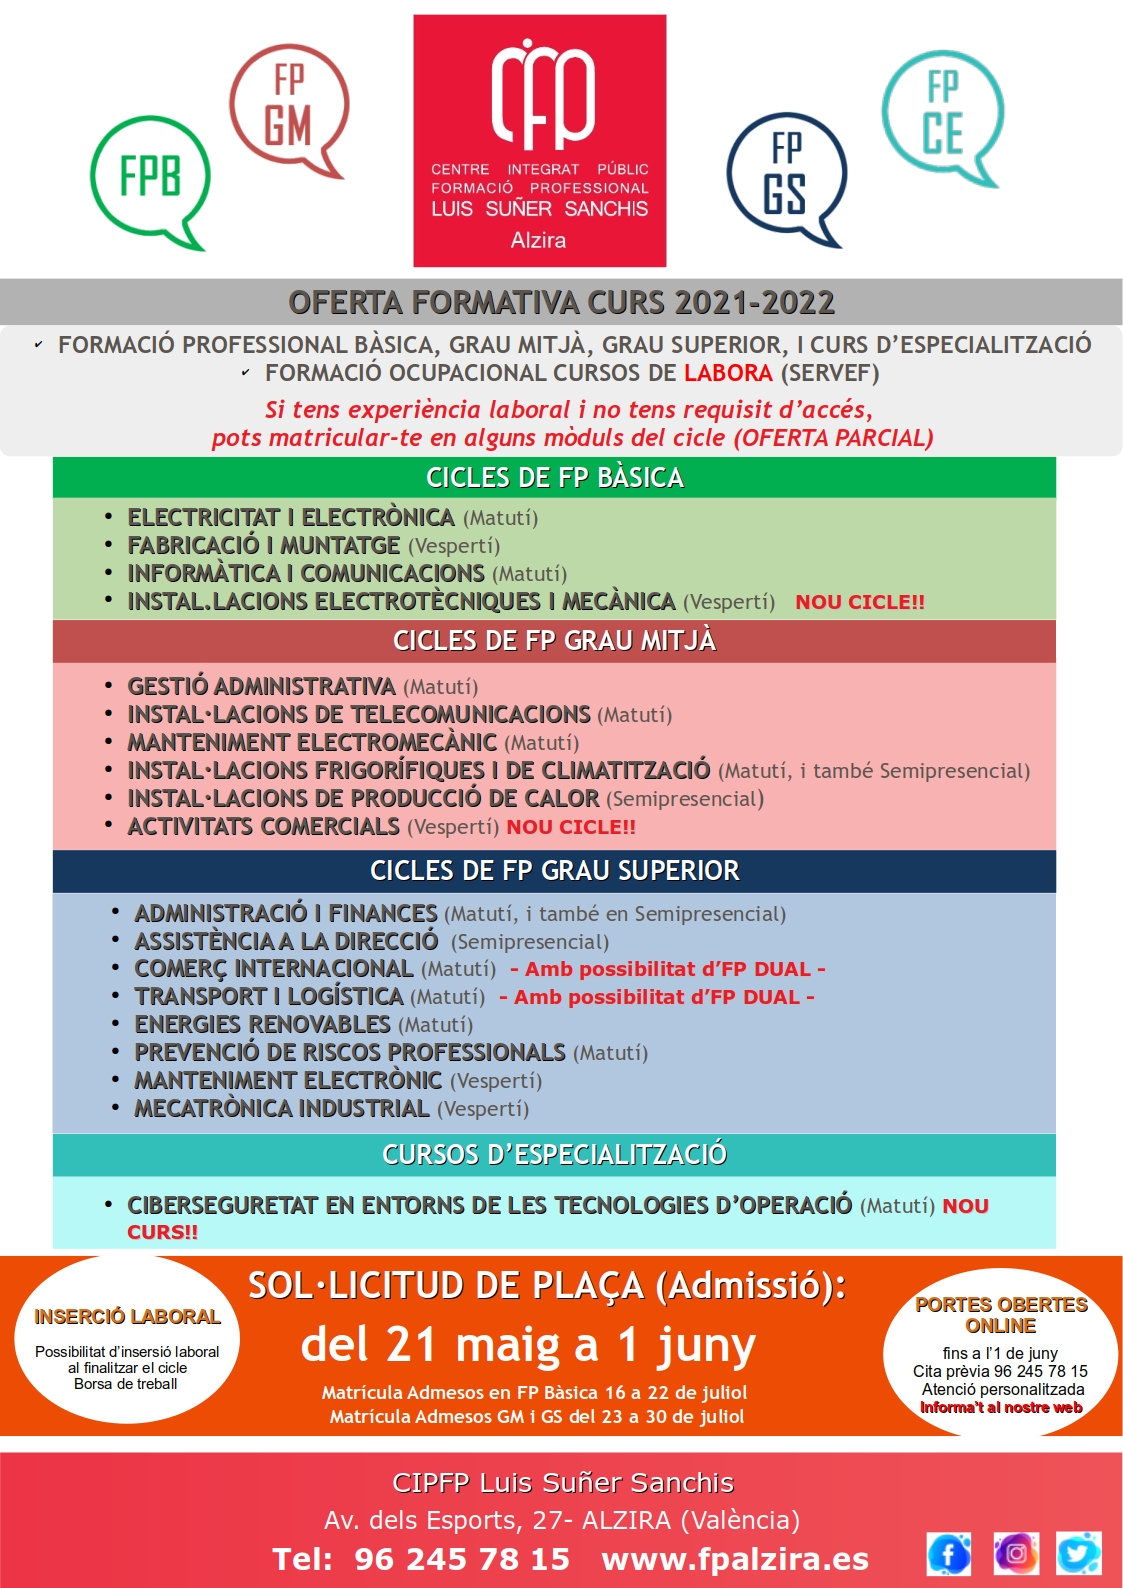 POSTER CURS 2019 20